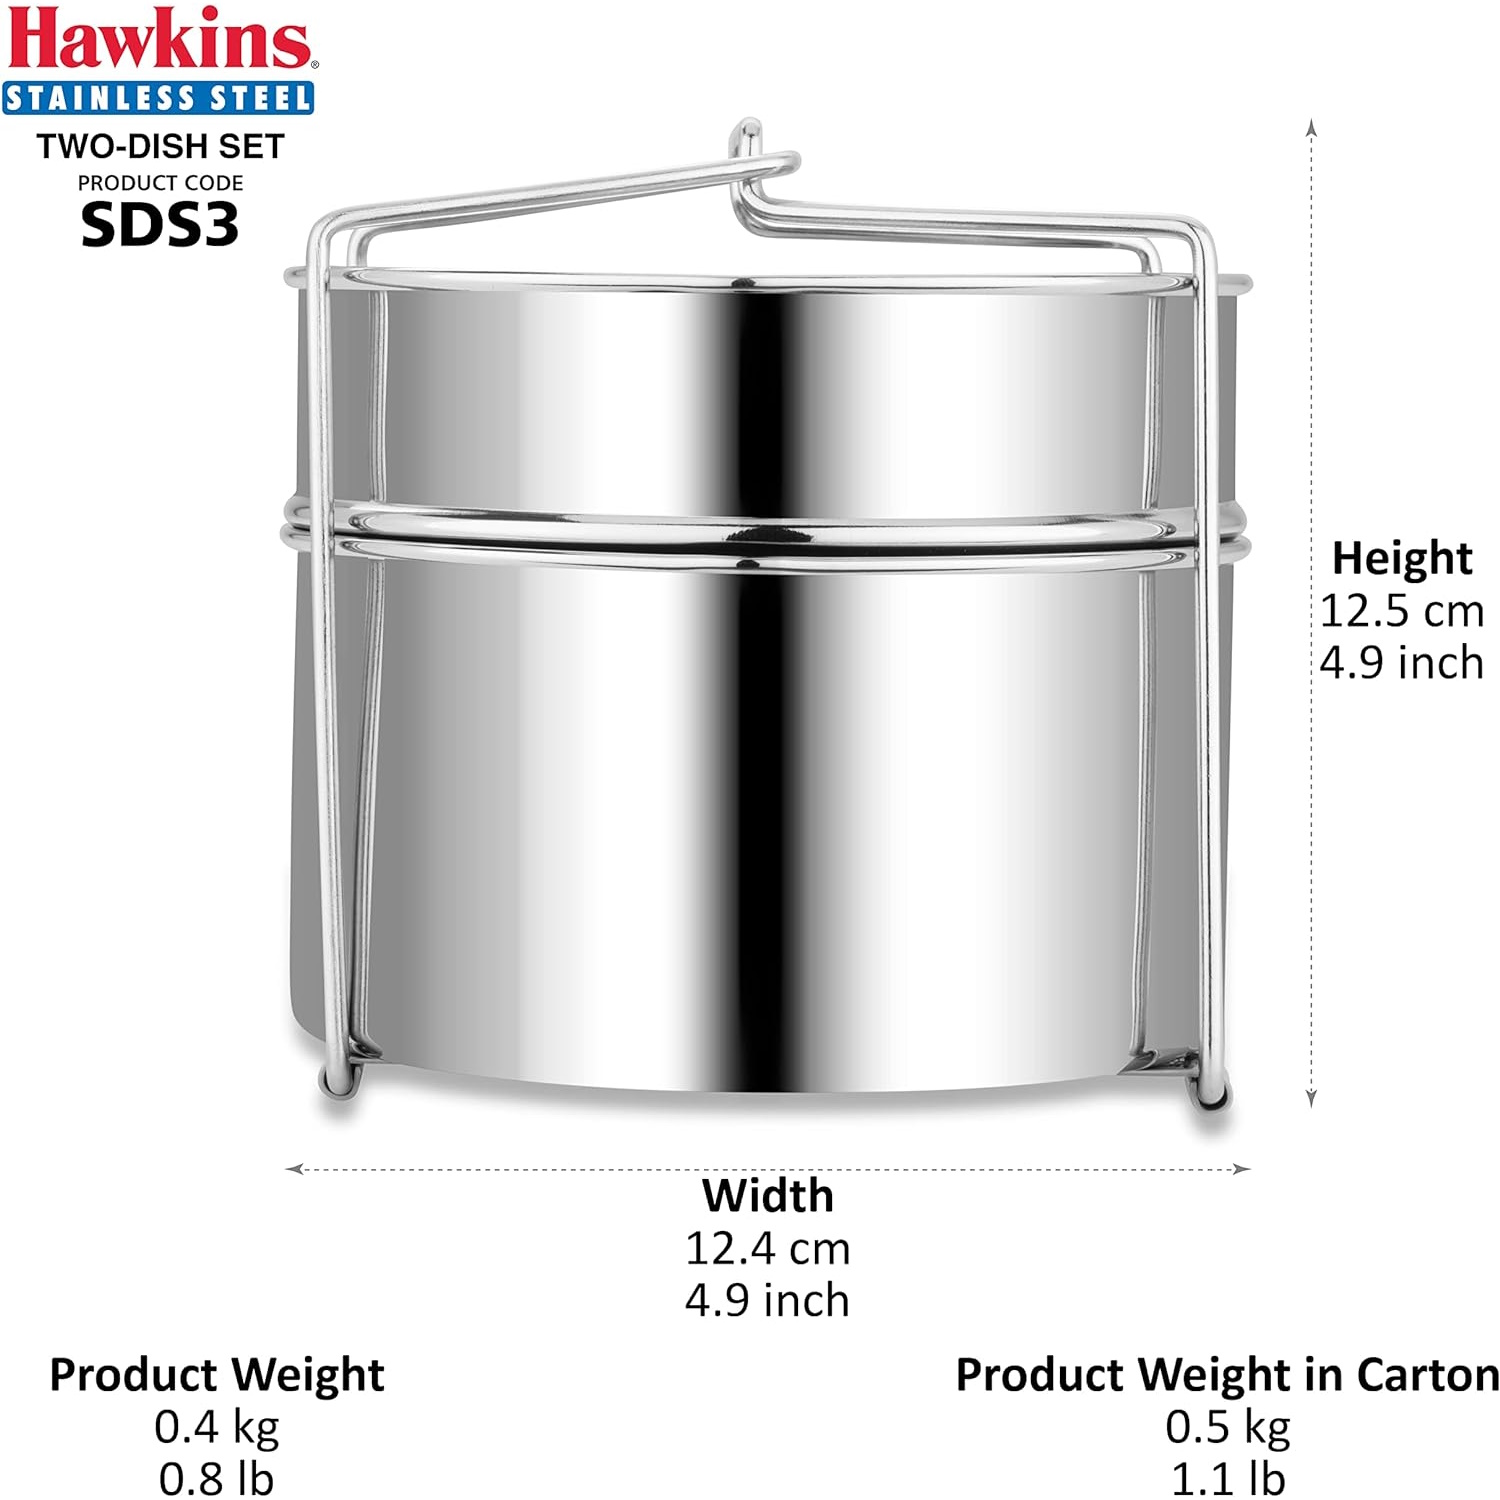 Hawkins Stainless Steel Two-dish Set SDS3